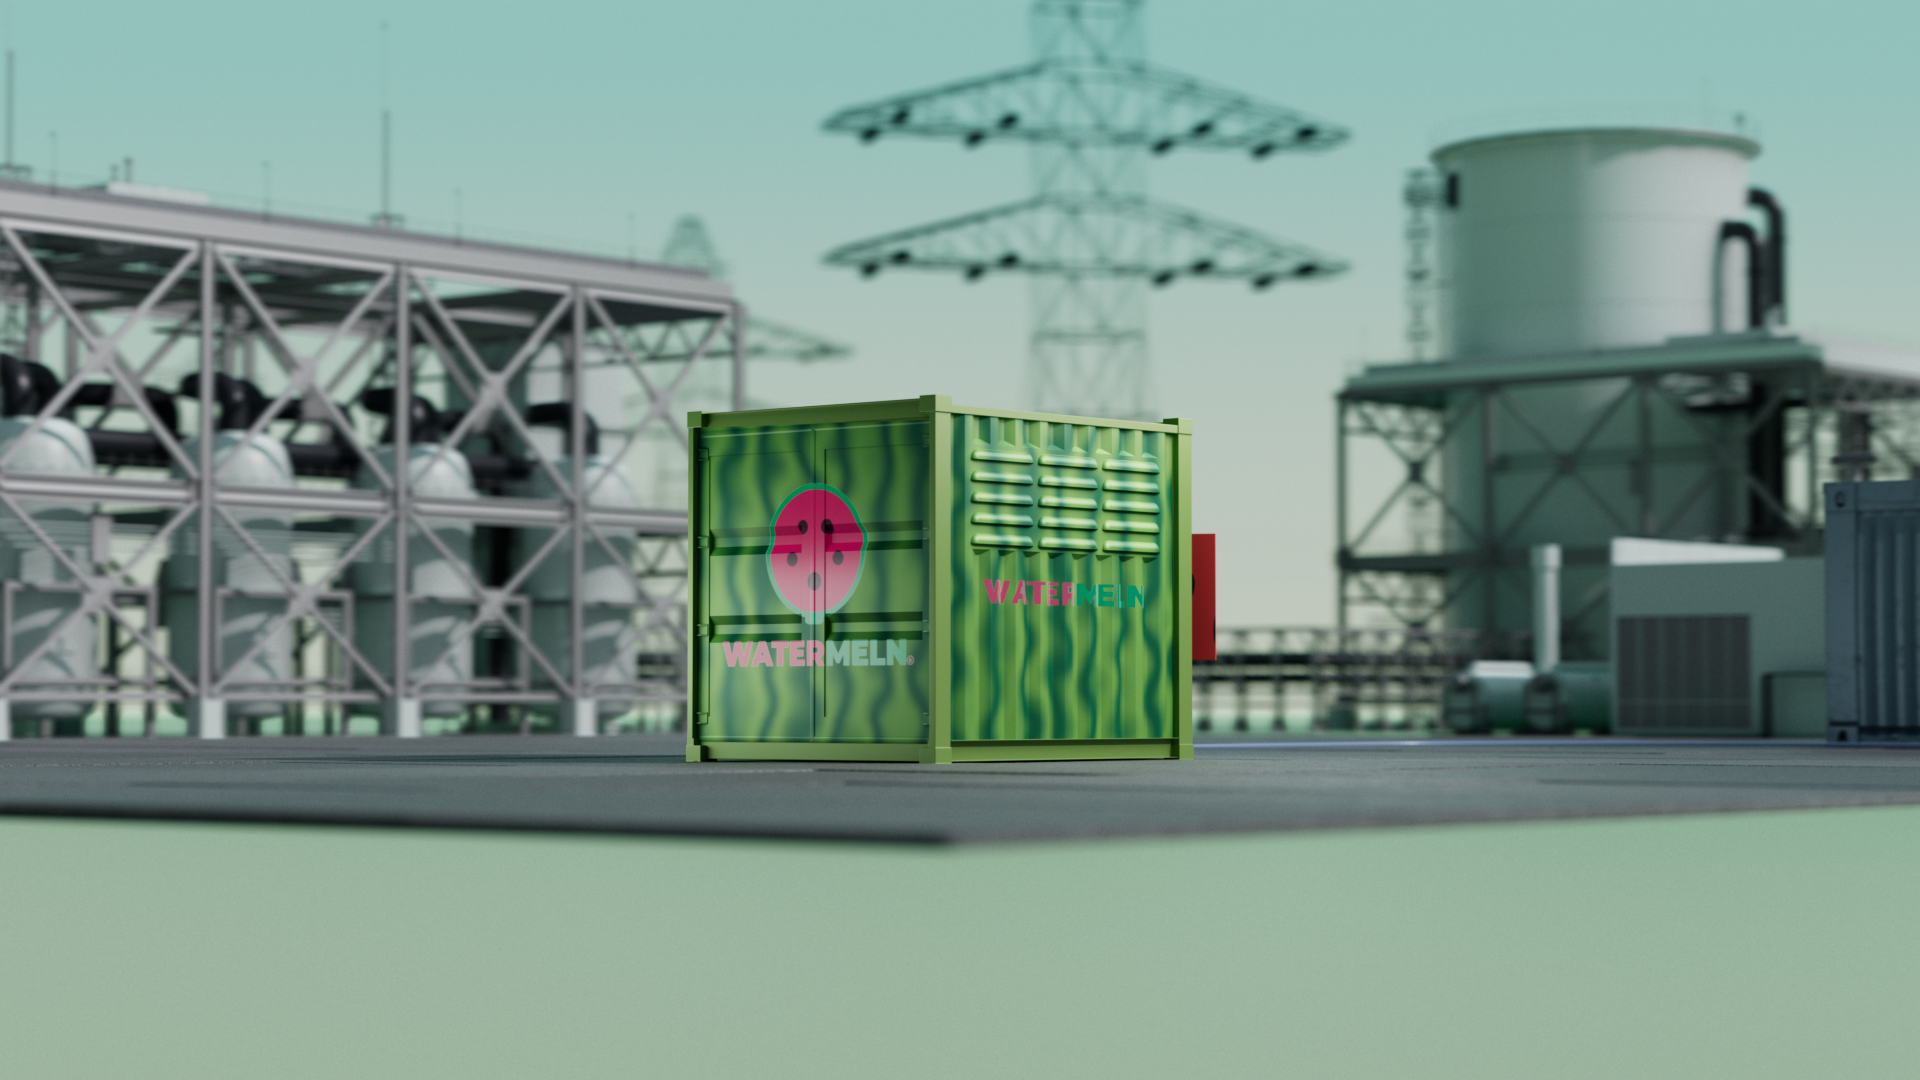 Rendered image of Watermeln hydrogen container in industrial environment